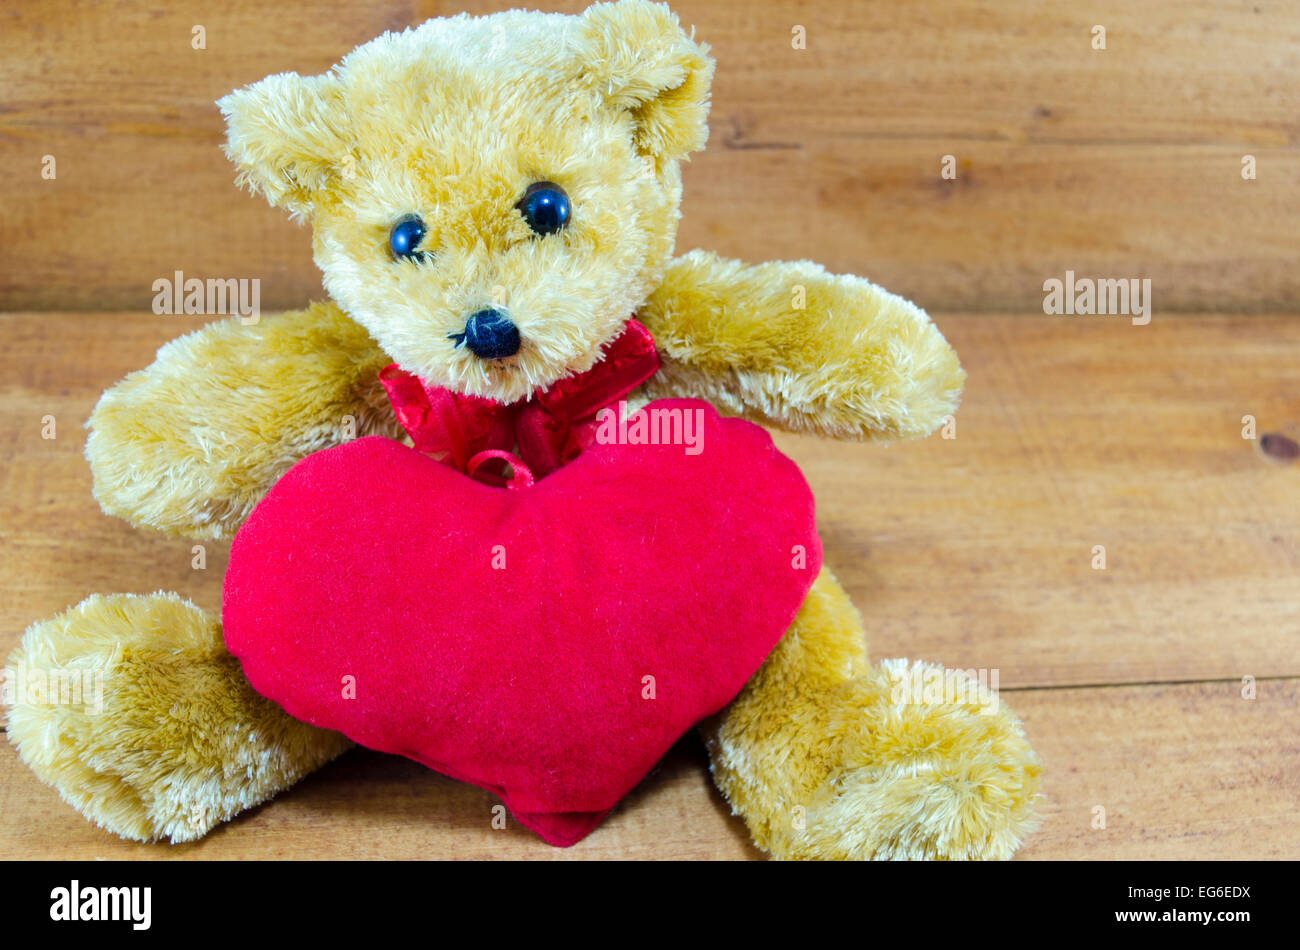 Brown teddy bear hugging a big red heart on a wooden table Stock Photo